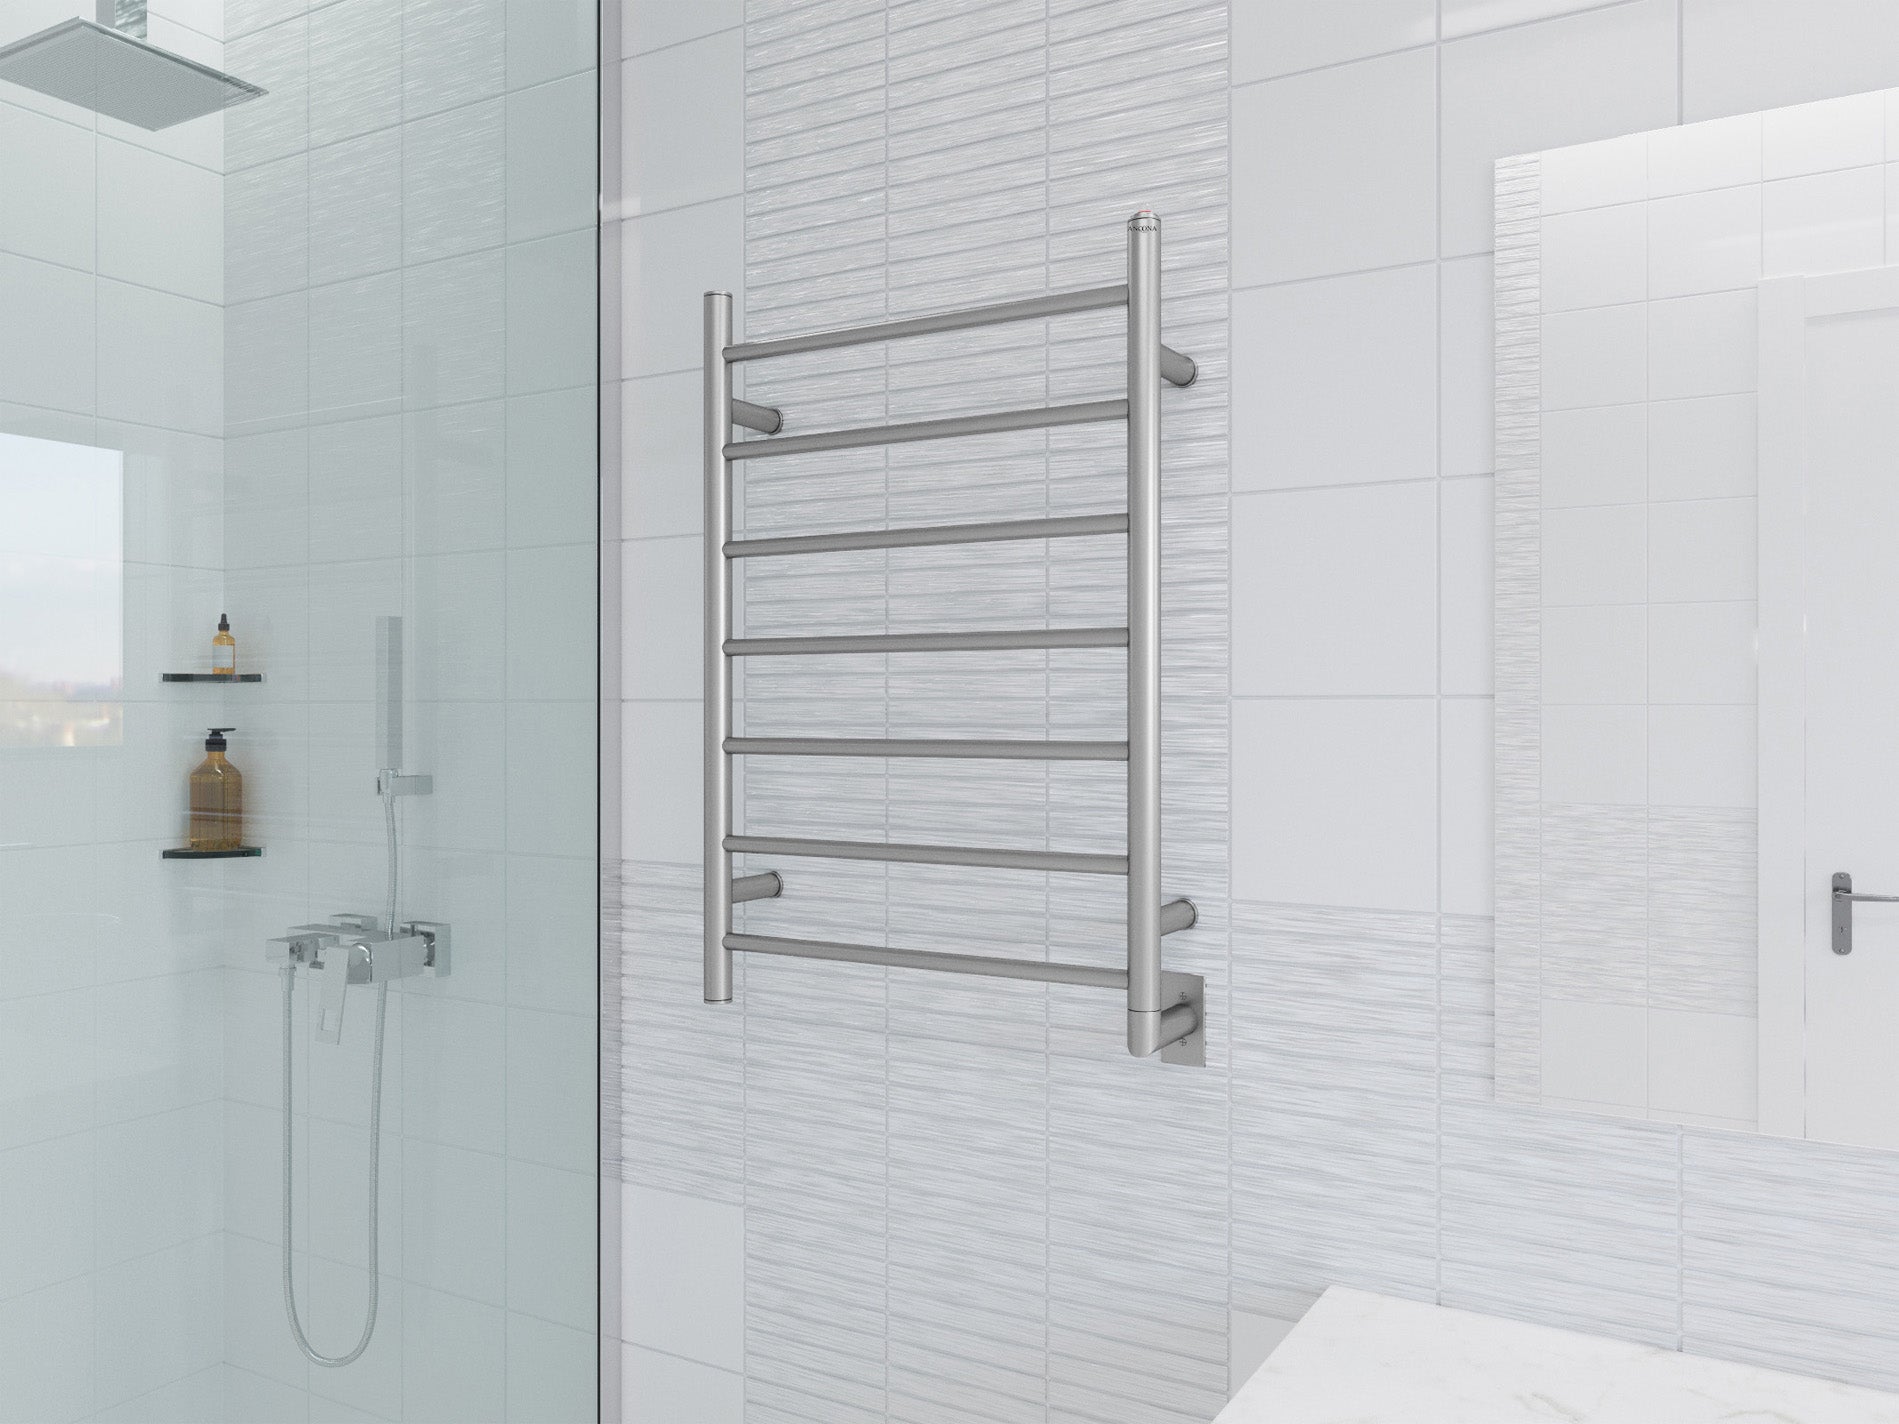 Comfort 7 - 31 in. Hardwired Electric Towel Warmer and Drying Rack in Brushed Stainless Steel